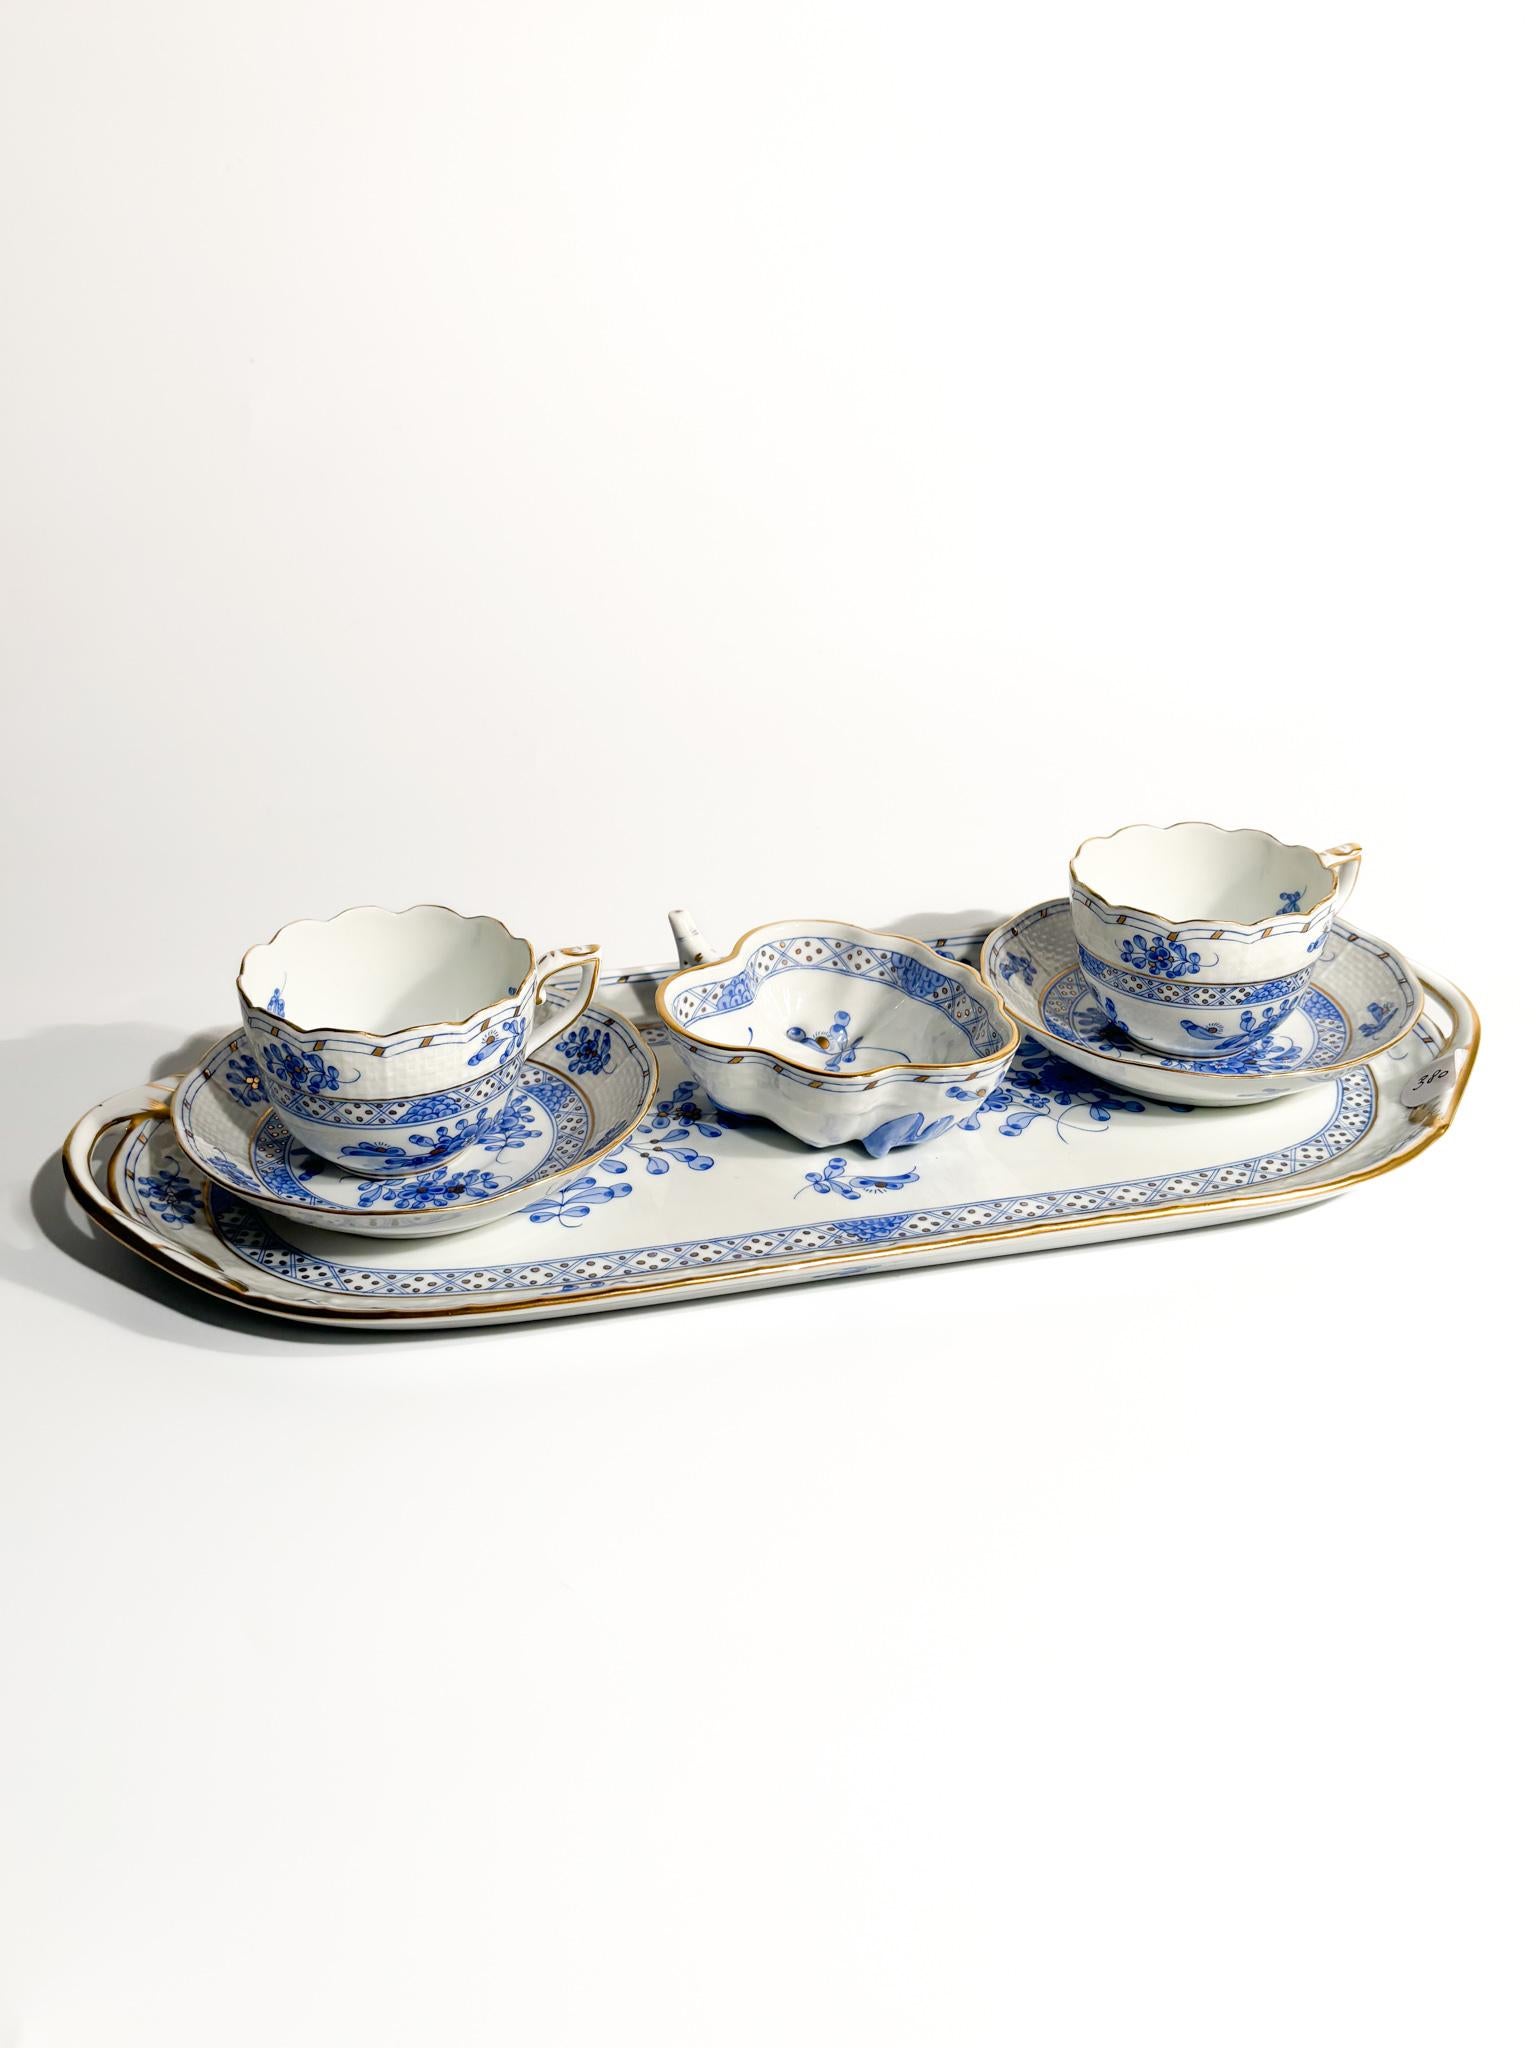 Coffee service for two with porcelain tray by Herend Waldstein, made in the 1950s

Tray: Ø cm 36 h cm 15,5

Herend porcelain is among the most prestigious and sought after in the world. Made in Hungary since 1826, Herend is known for its exceptional